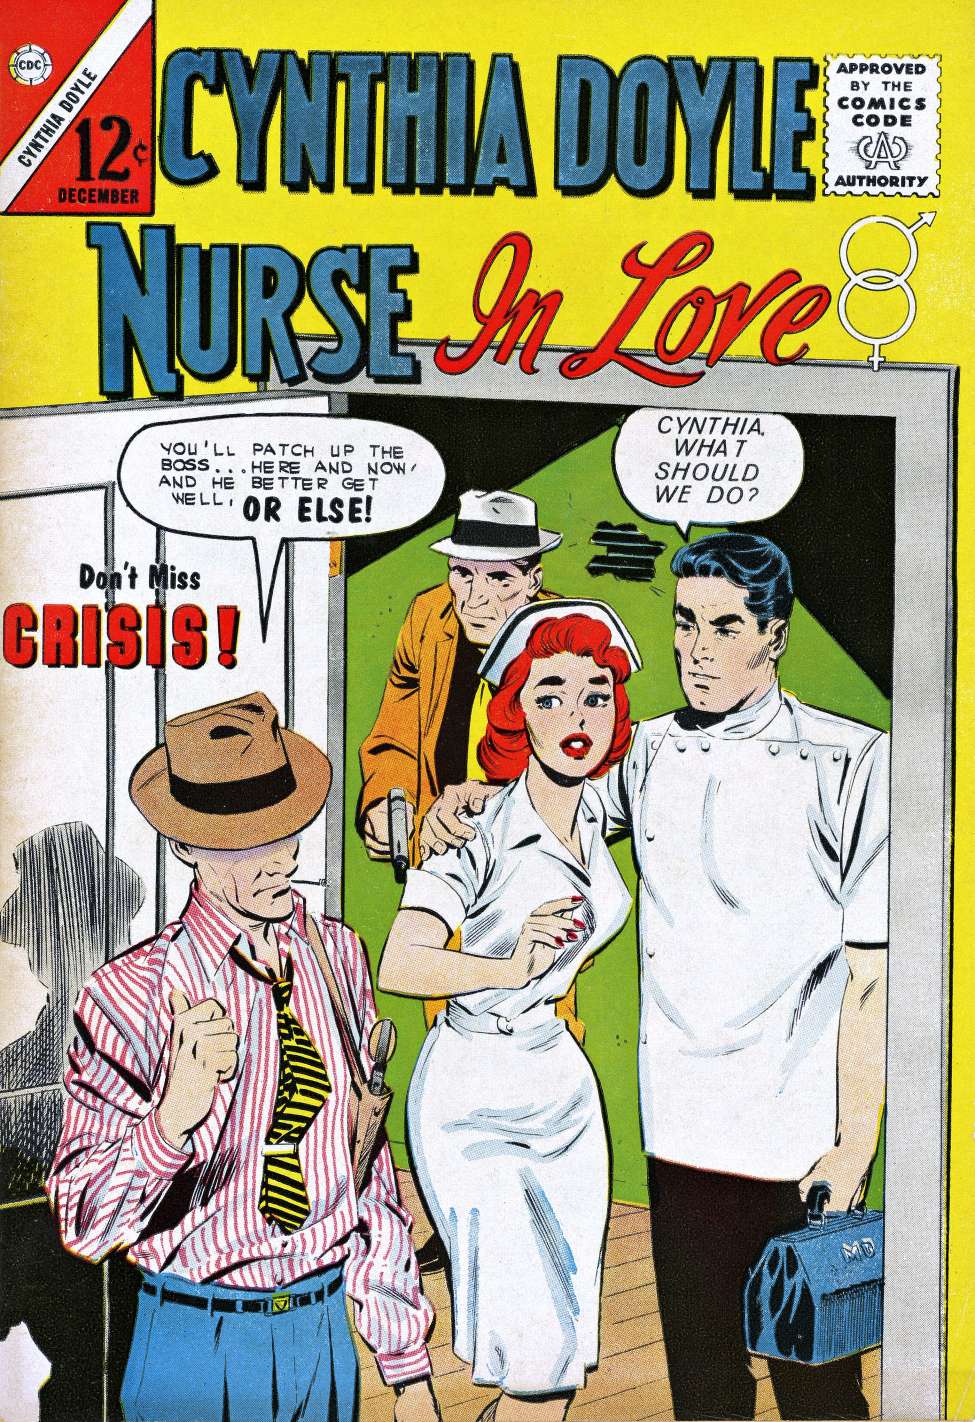 Book Cover For Cynthia Doyle, Nurse in Love 67